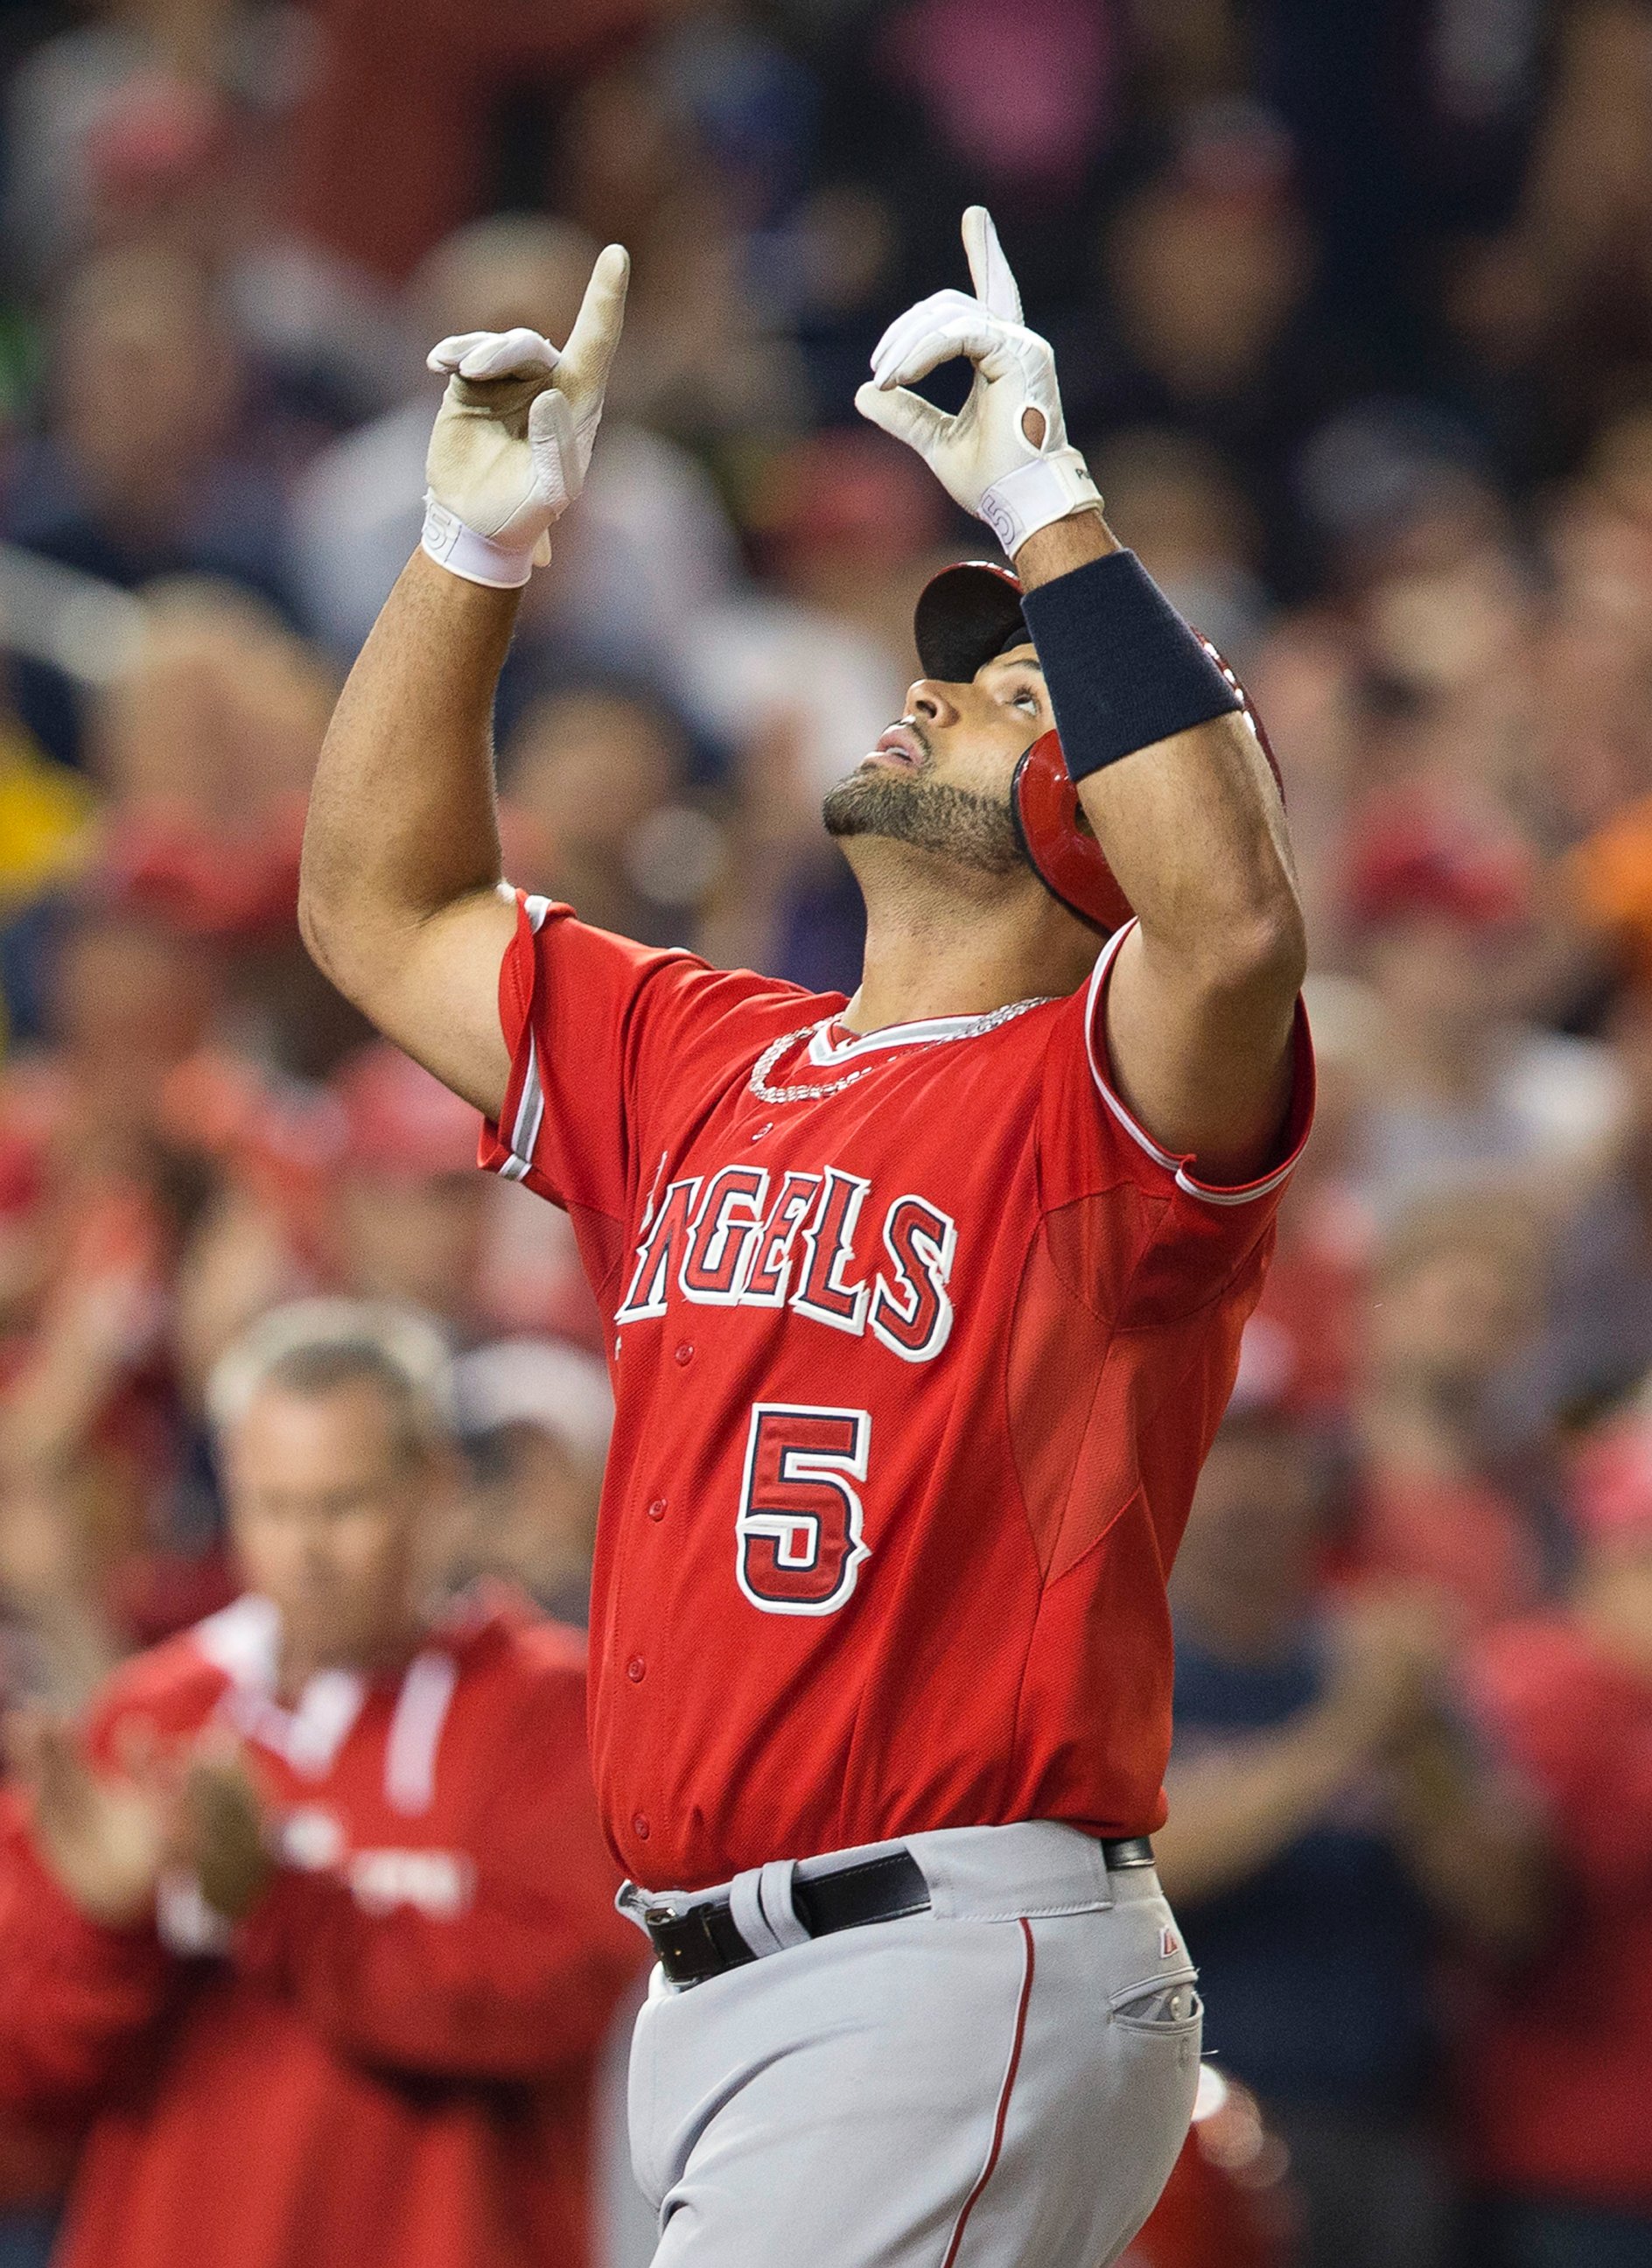 PHOTO: Albert Pujols points upward as he crosses home plate after hitting his 500th career home run, April 22, 2014.